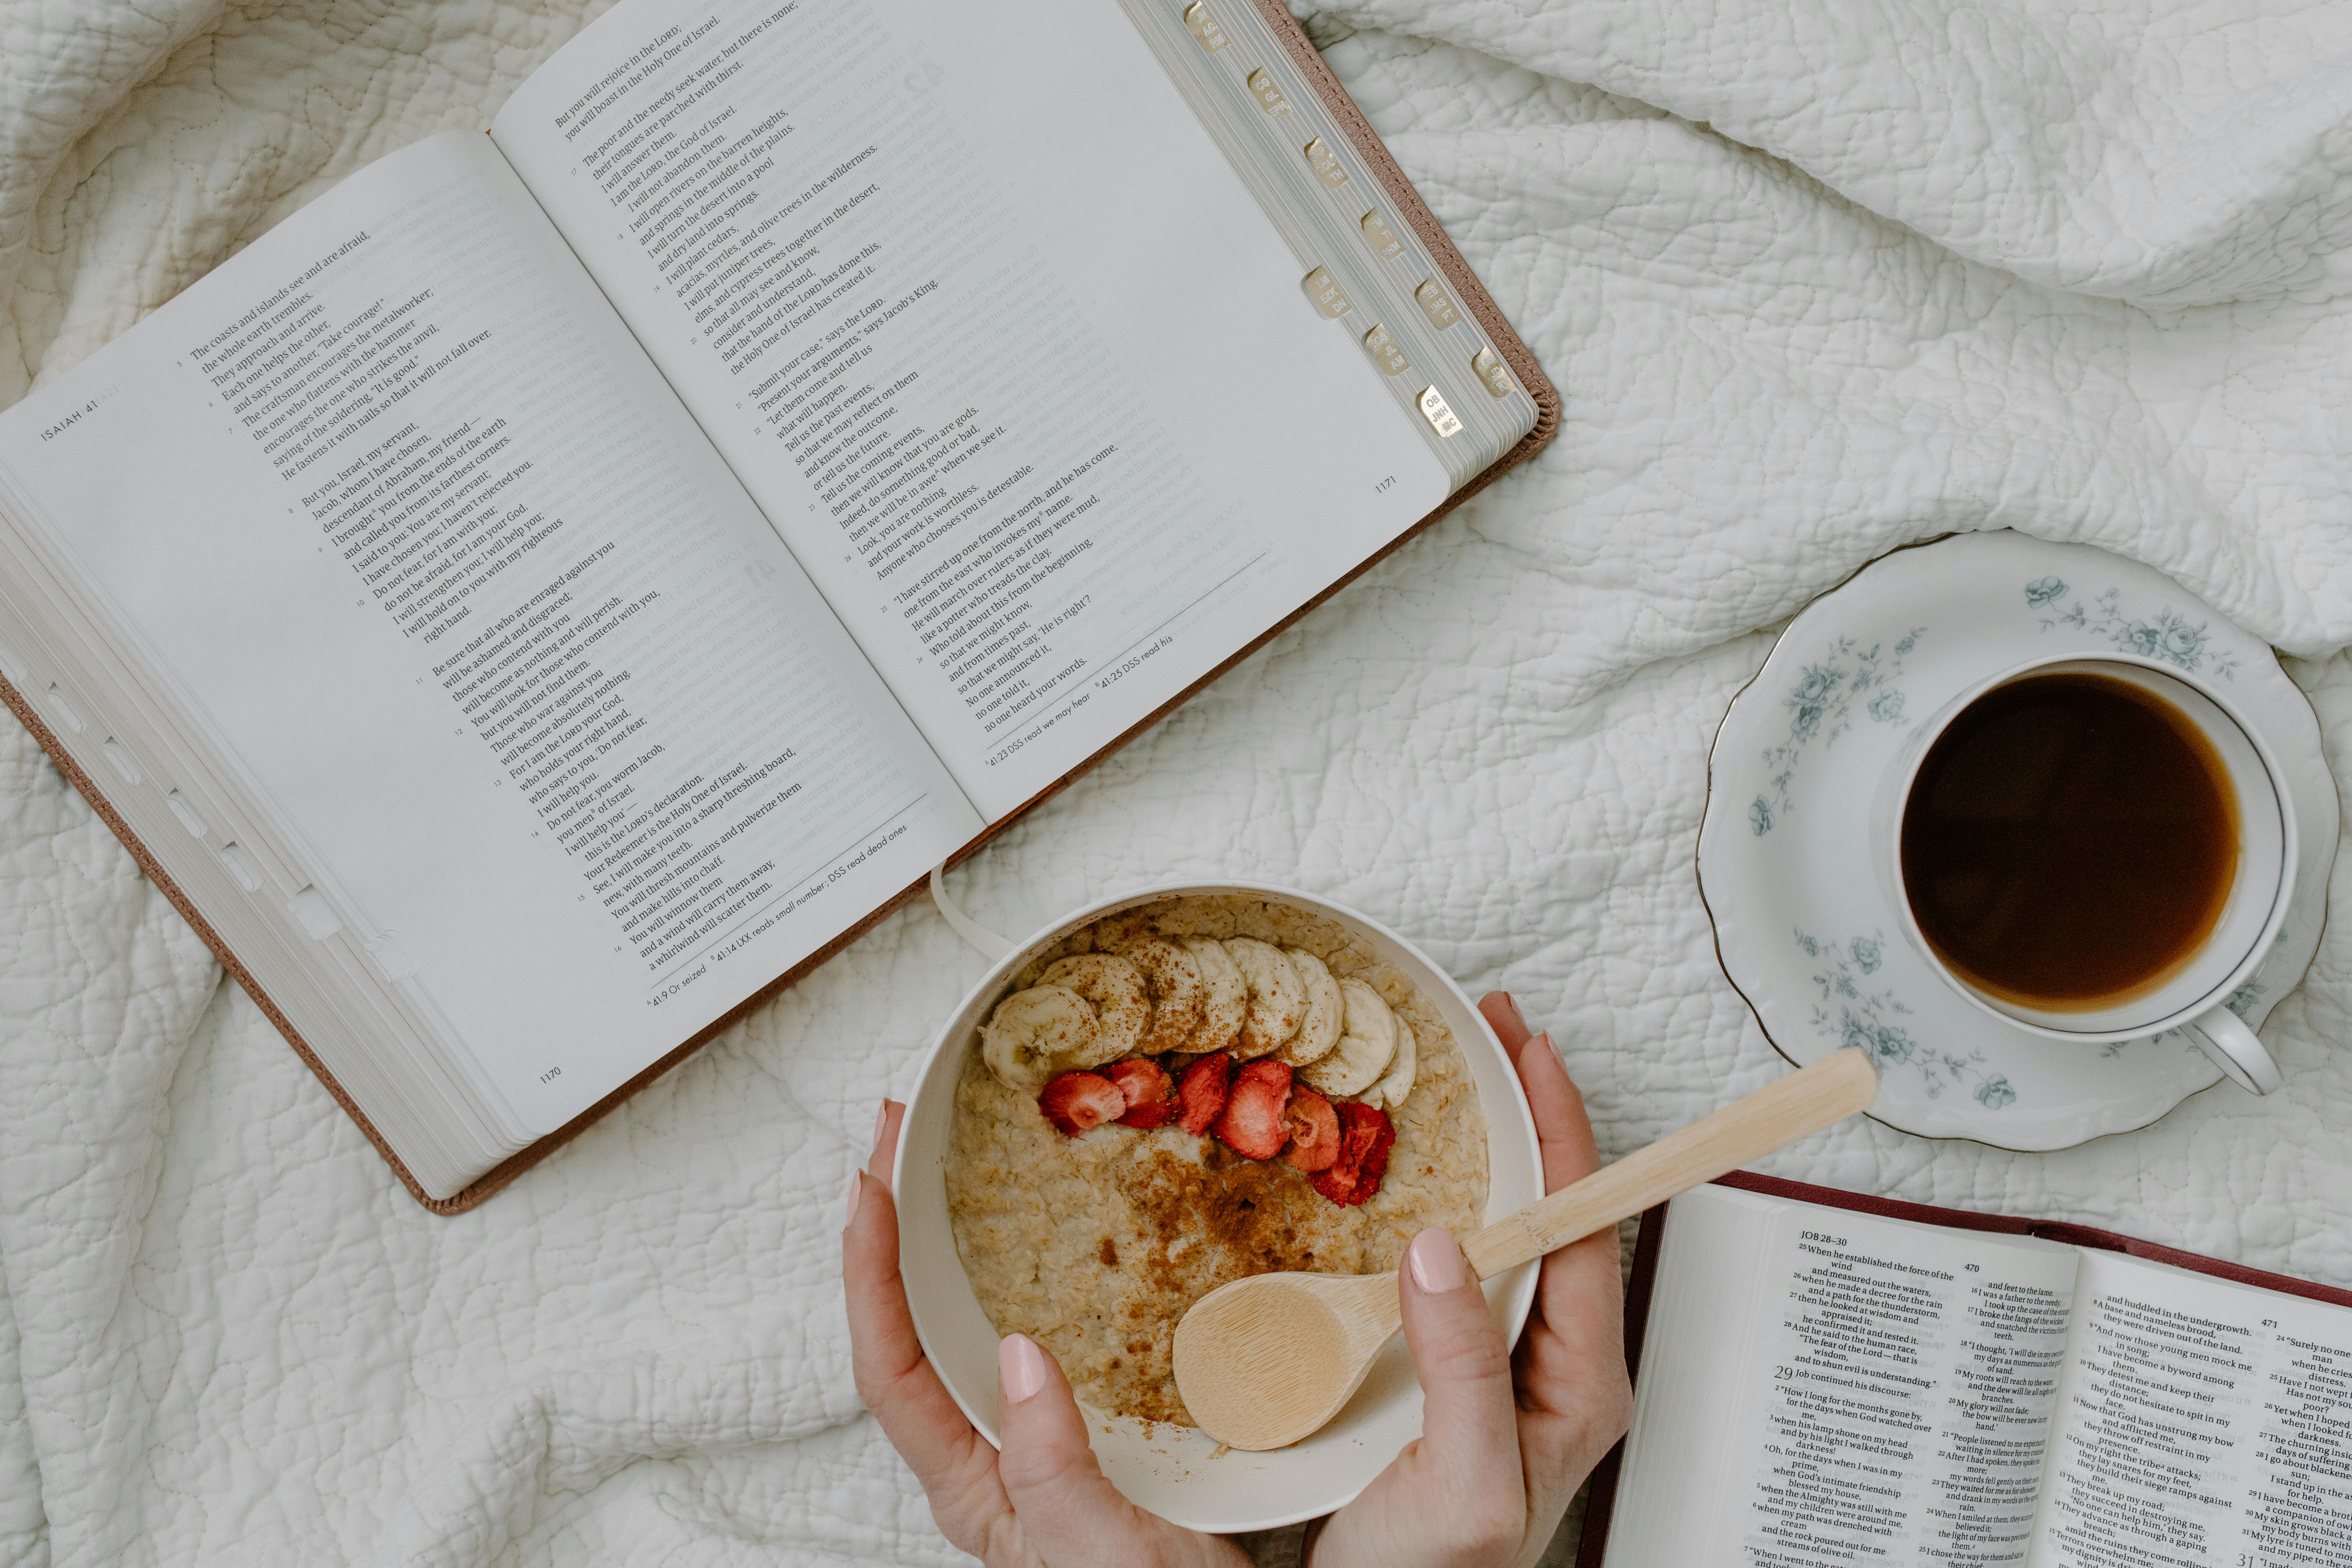 a person holding a bowl of cereal beside the open book and coffee